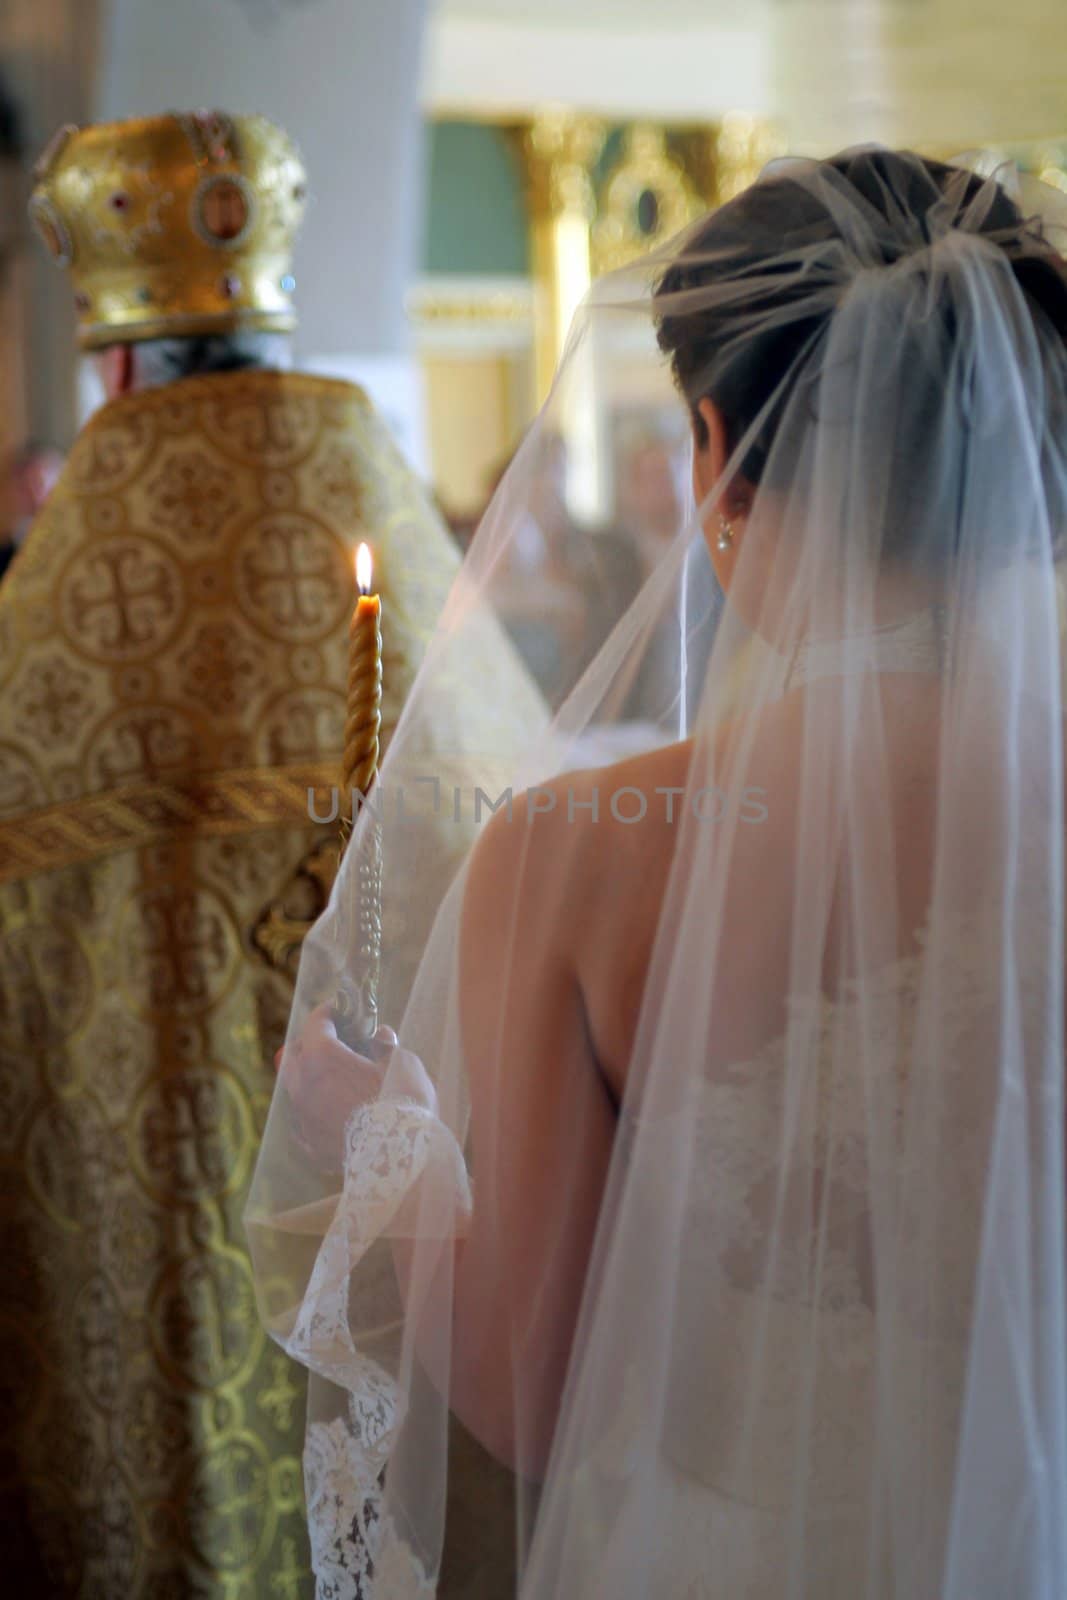 Rear view of bride wearing white wedding dress and holding lighted candle walking behind orthodox priest.